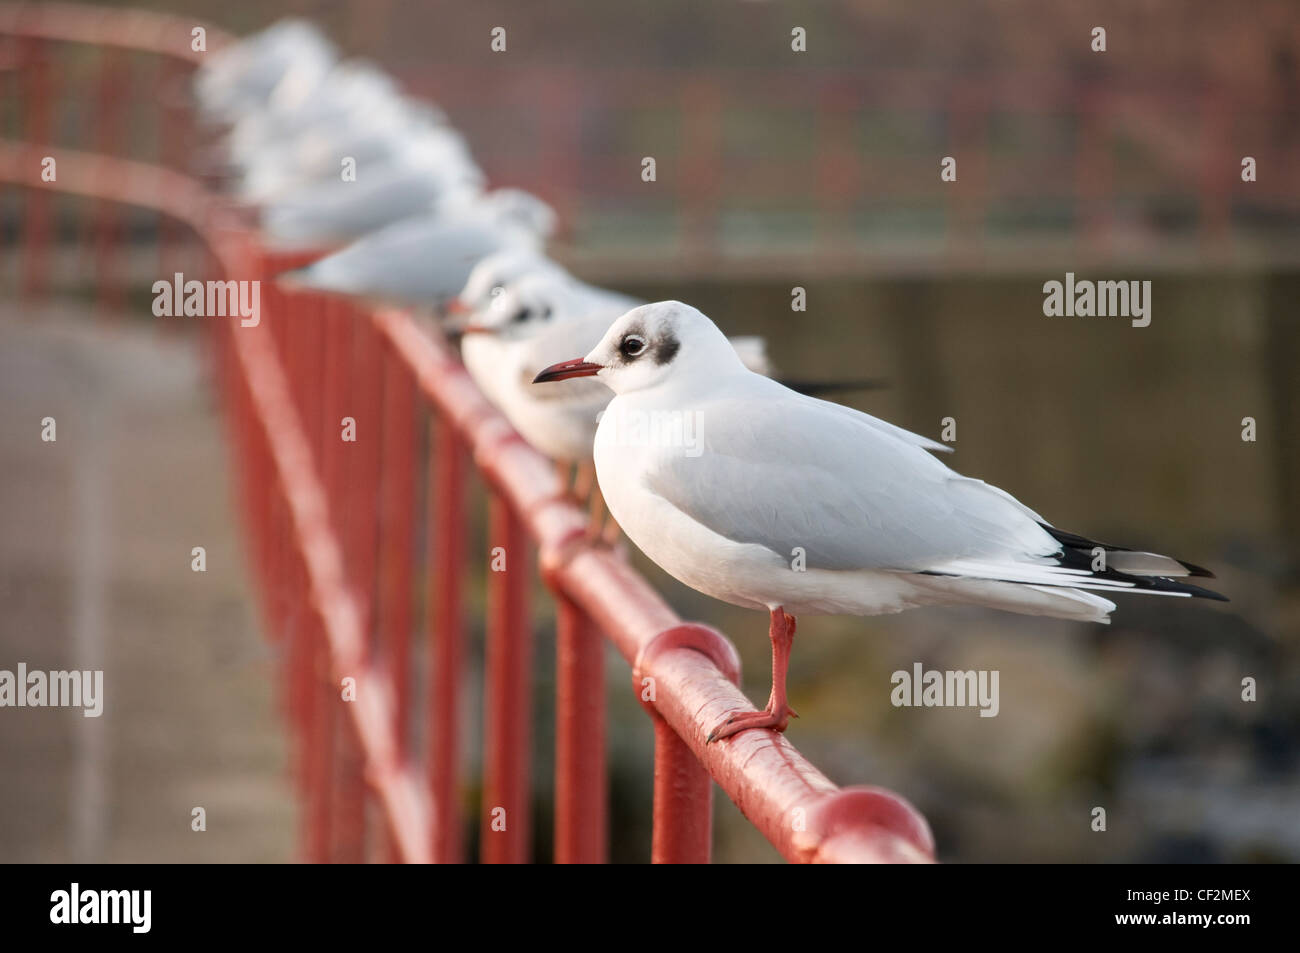 Black-headed gulls in winter plummage, perched on railings. Stock Photo